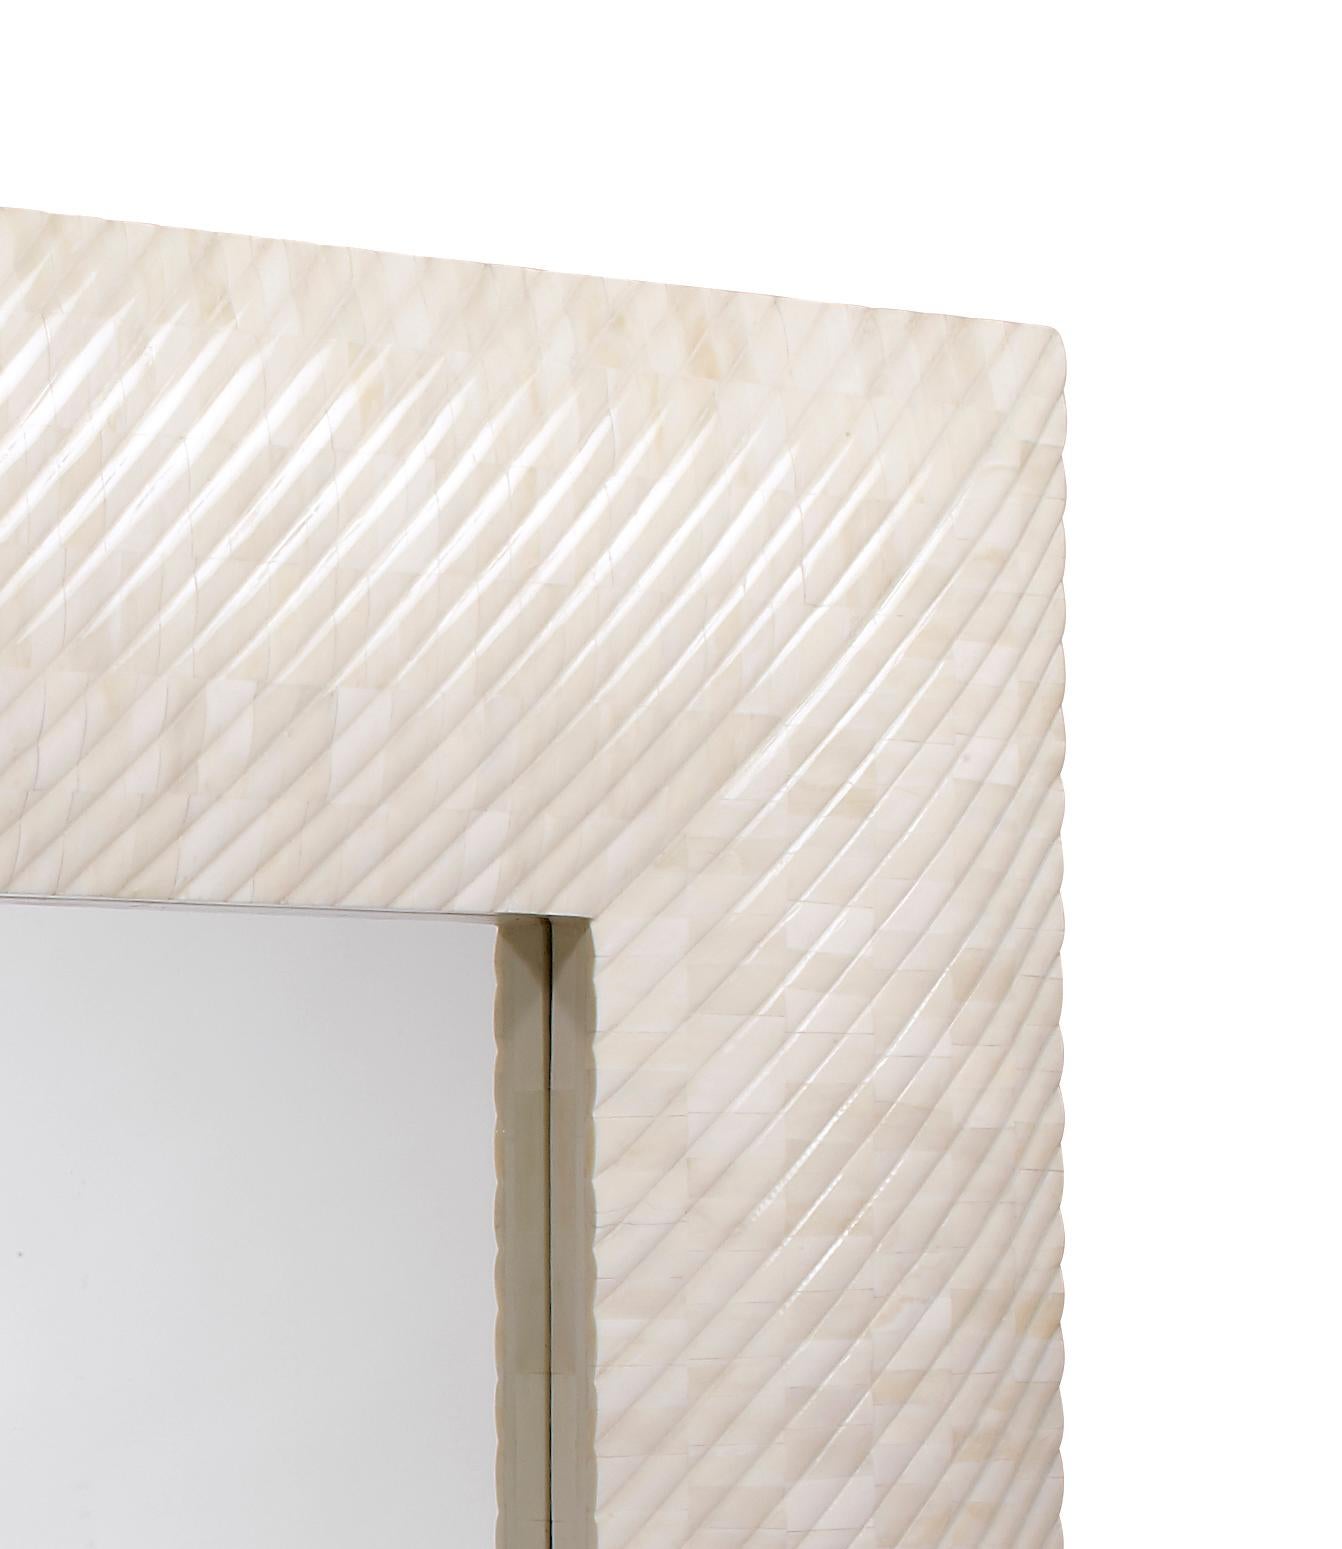 Hollywood Regency Square Mirror Made with Carved Bone, Aspire Mirror